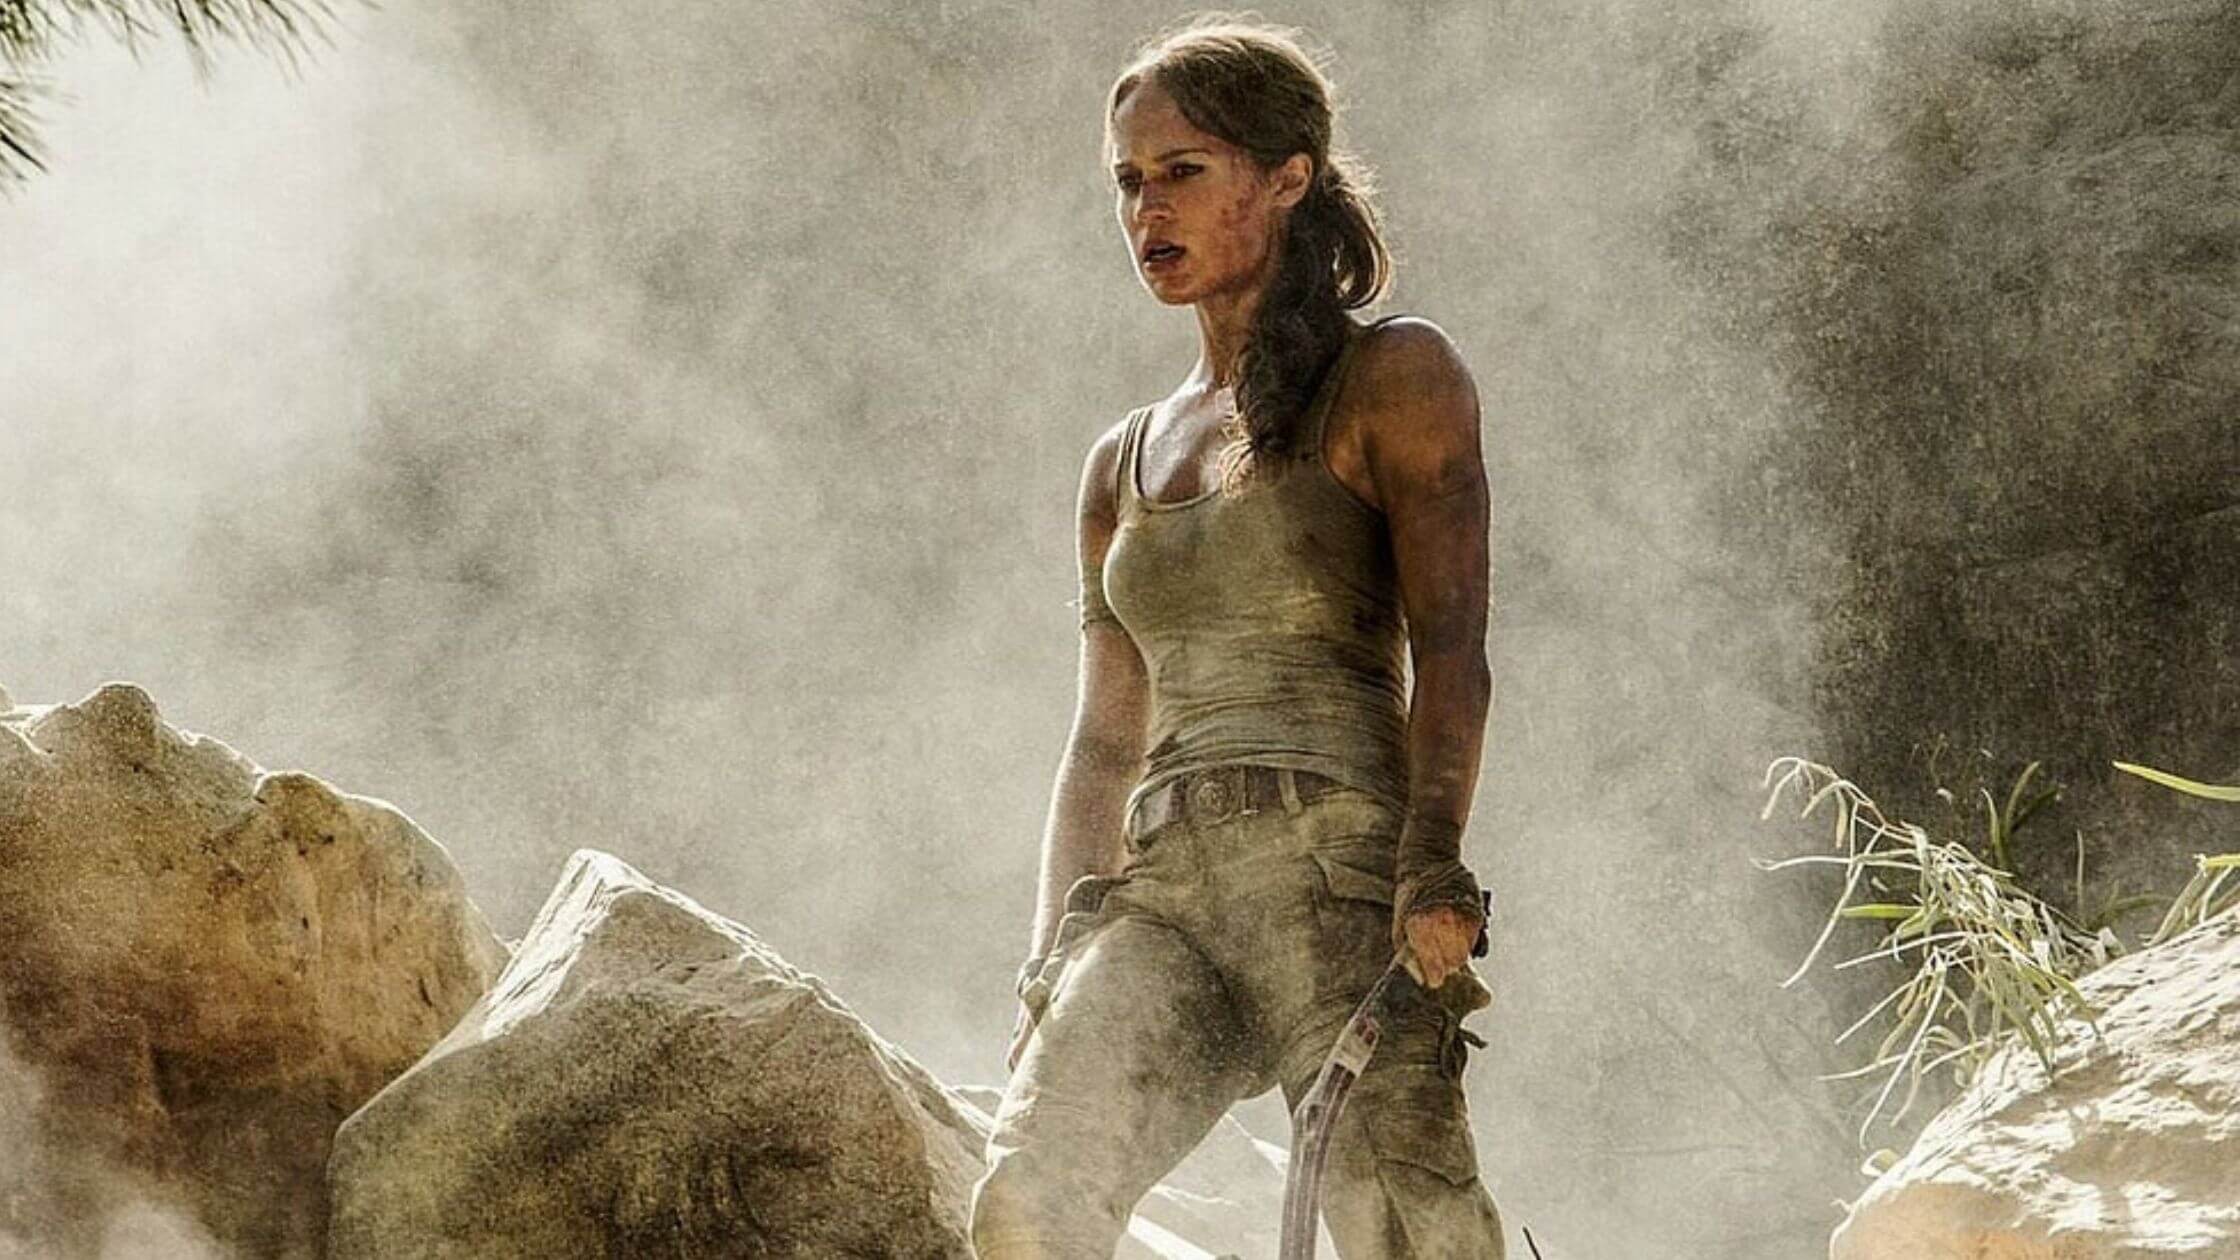 Tomb Raider 2 Gets Disappointing Update From Alicia Vikander